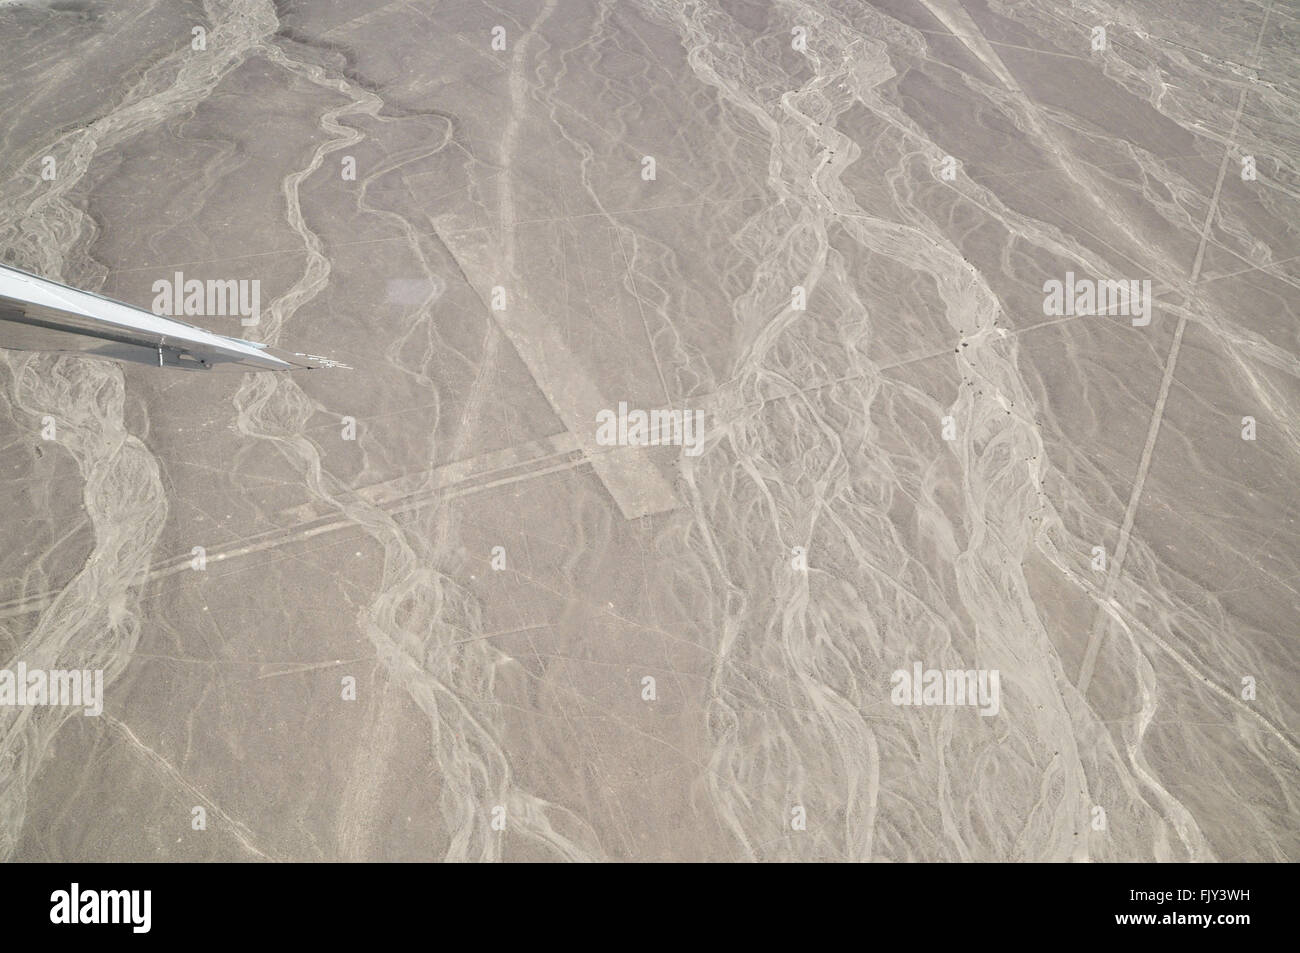 Aerial View Of Desert Seen From Airplane Window Stock Photo